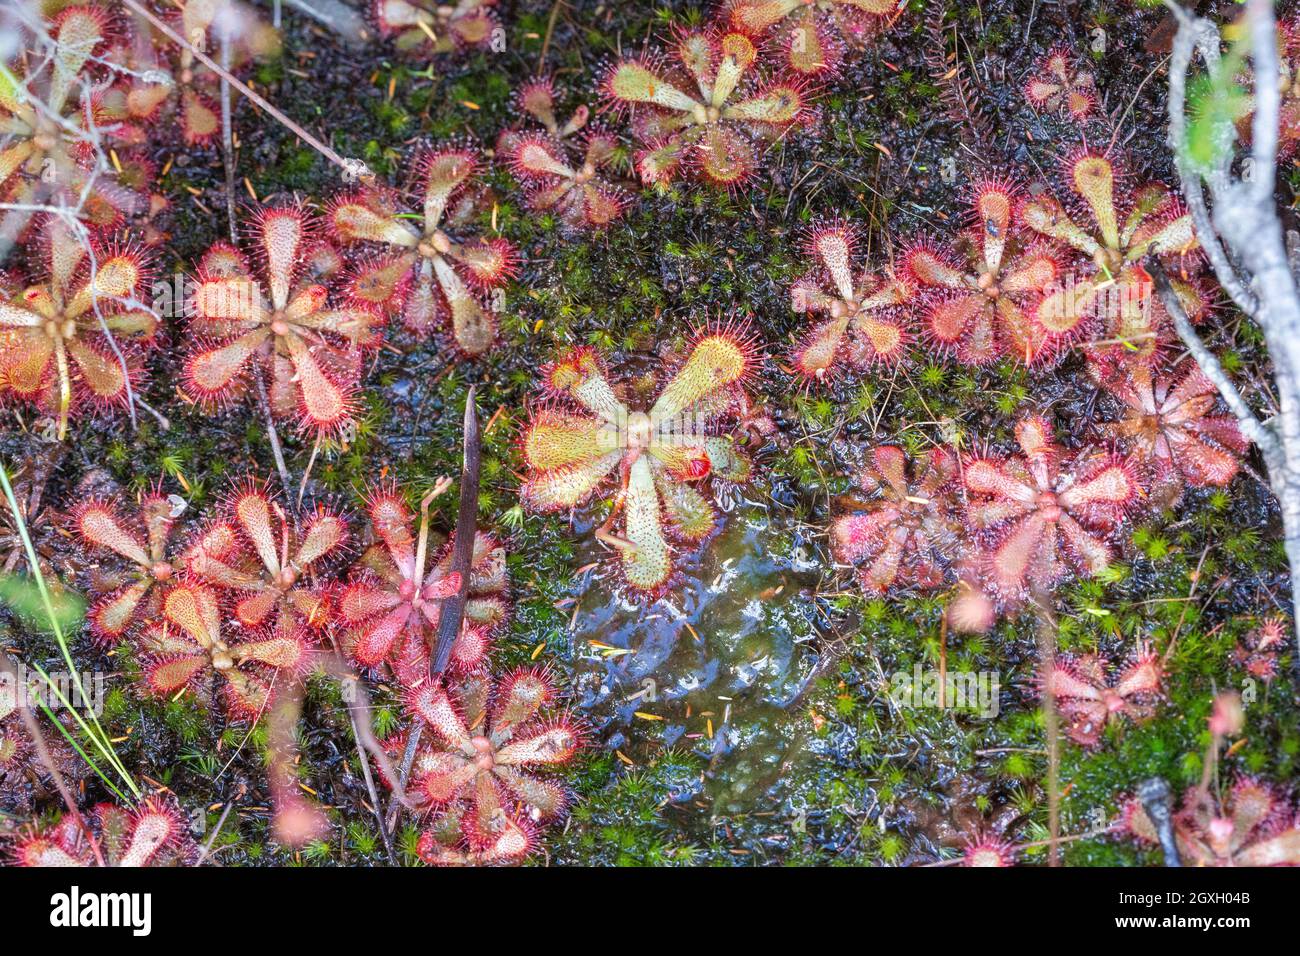 Group of a Sundew species seen close to Barrydale in the Western Cape of South Africa Stock Photo